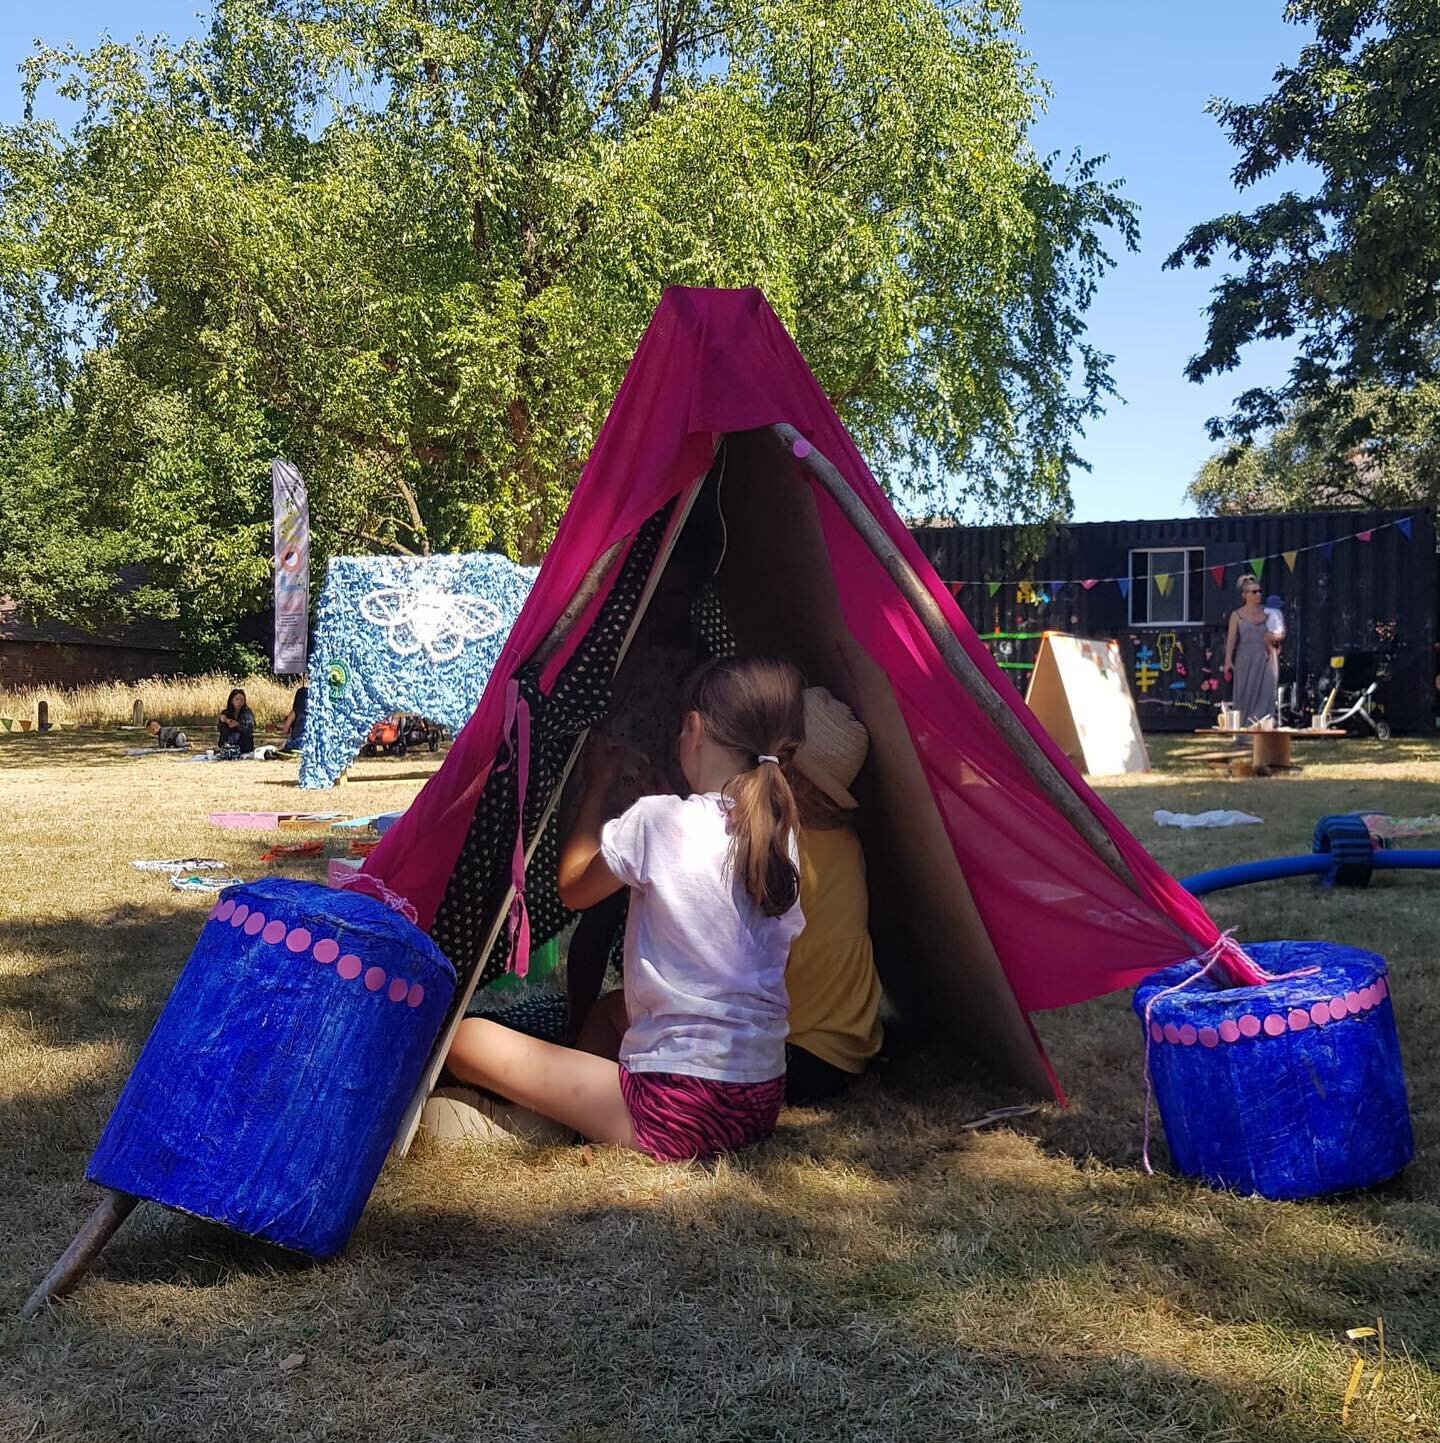 Dens, Fortresses, Castles etc ☀️
.
.
.
#gluecollective #spark #freeplay #artist #childledplay #creativeplay #loosearts #constructionplay #b2022festival #letsgoout #summerofplay